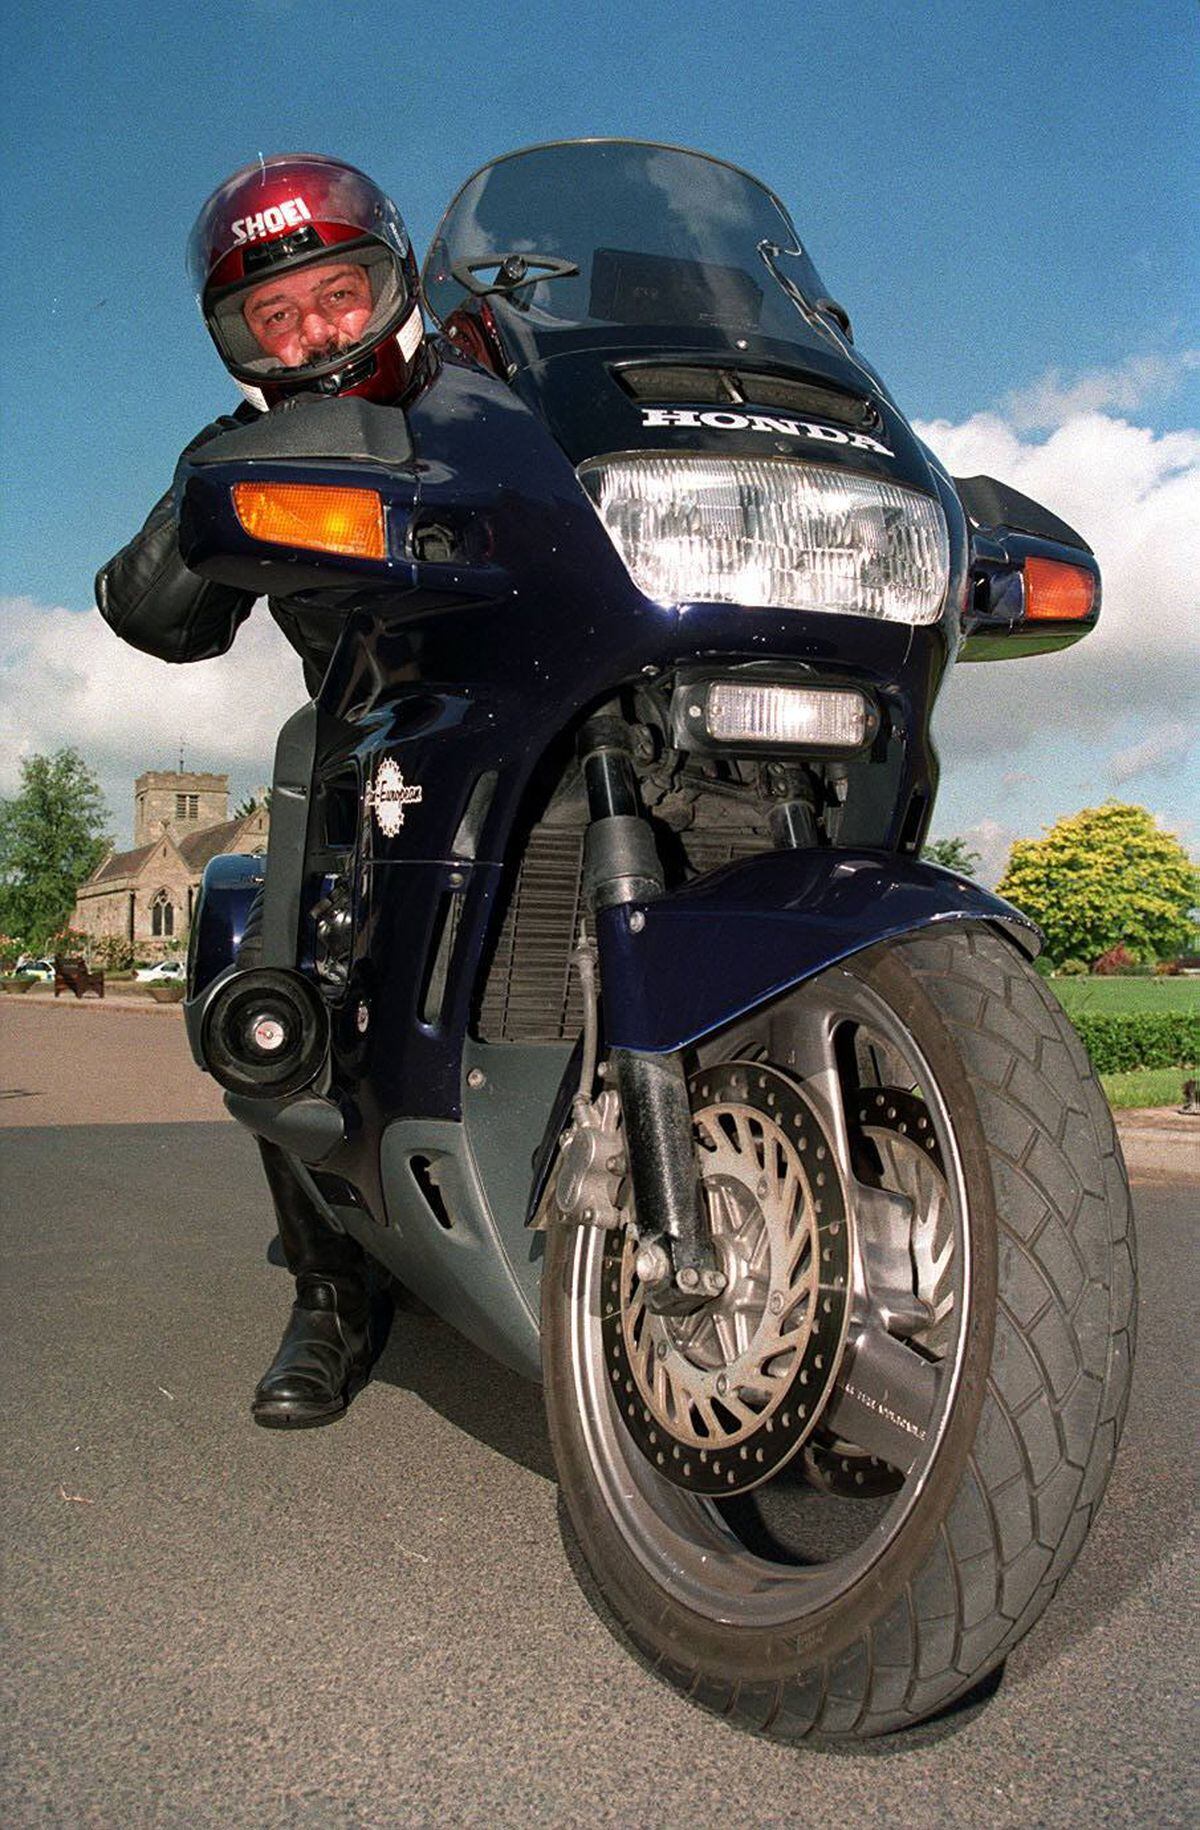 PC Dave Hopkins on an unmarked police bike